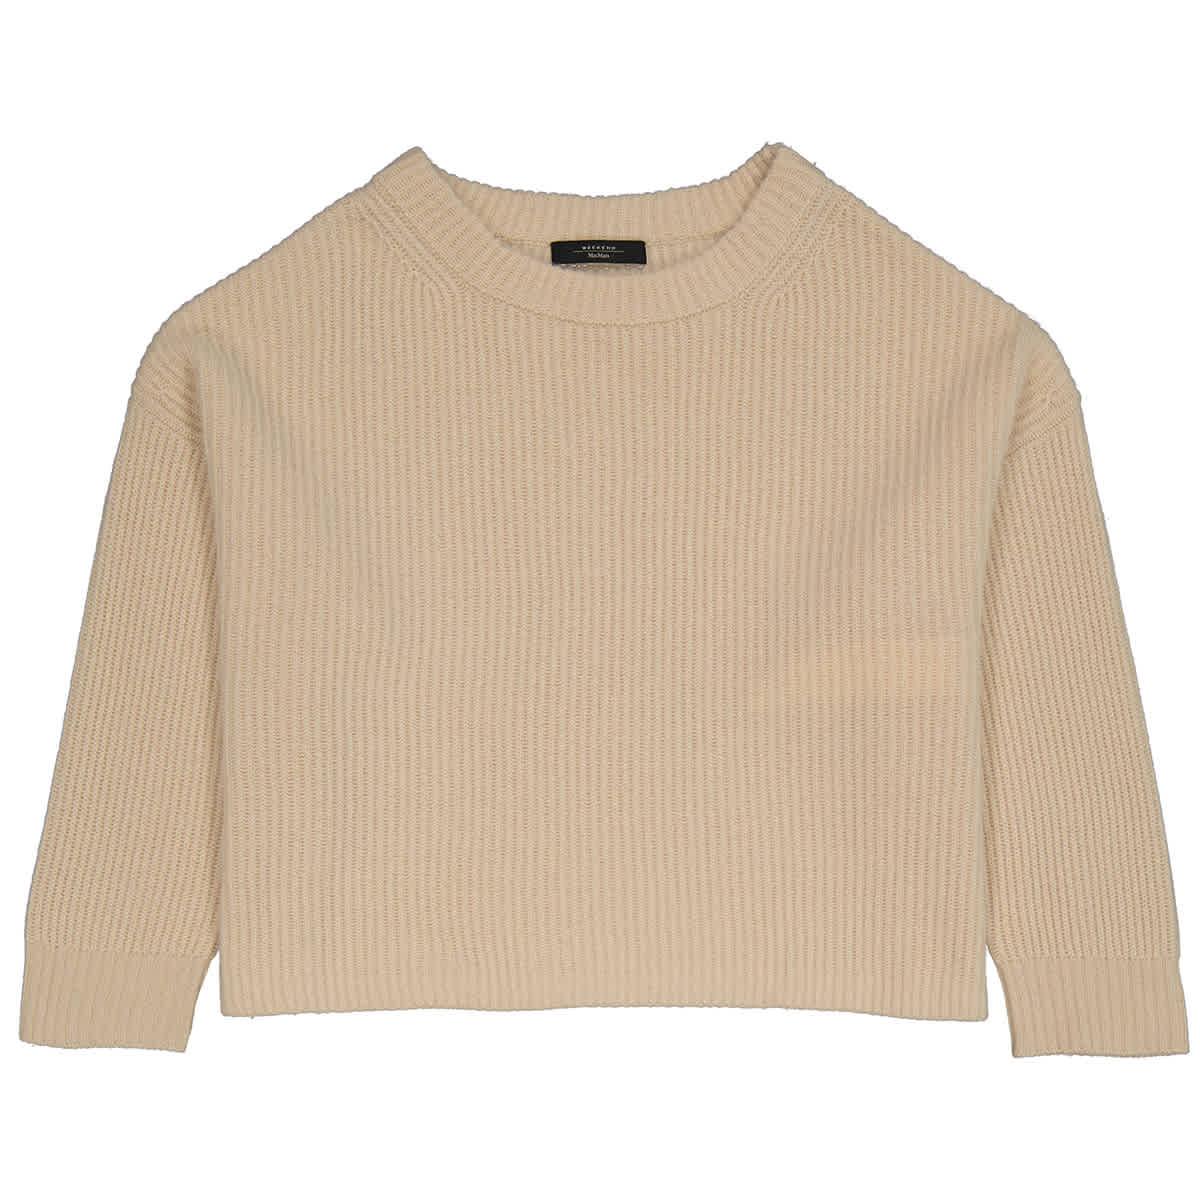 Max Mara Weekend Lotus Cashmere Sweater in Natural | Lyst Canada